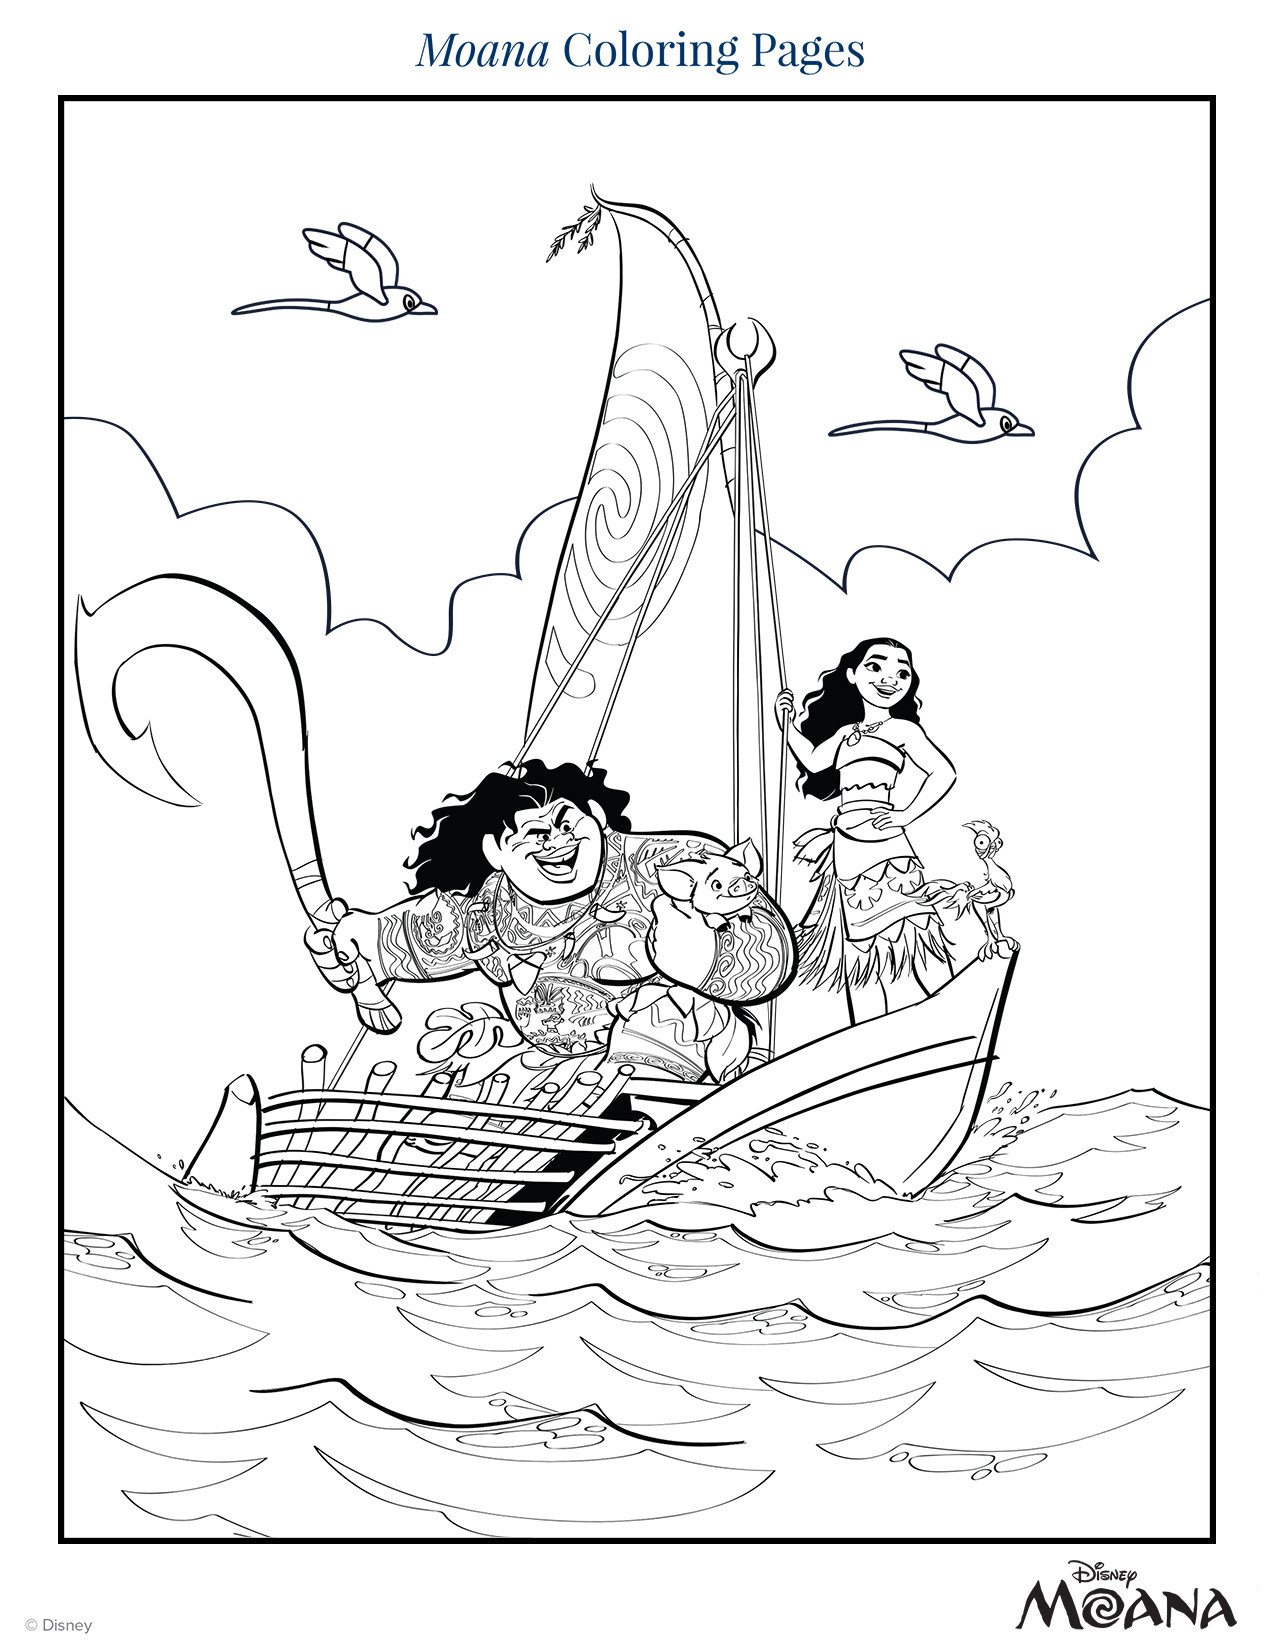 Moana Coloring Pages For Kids
 Moana Coloring Pages